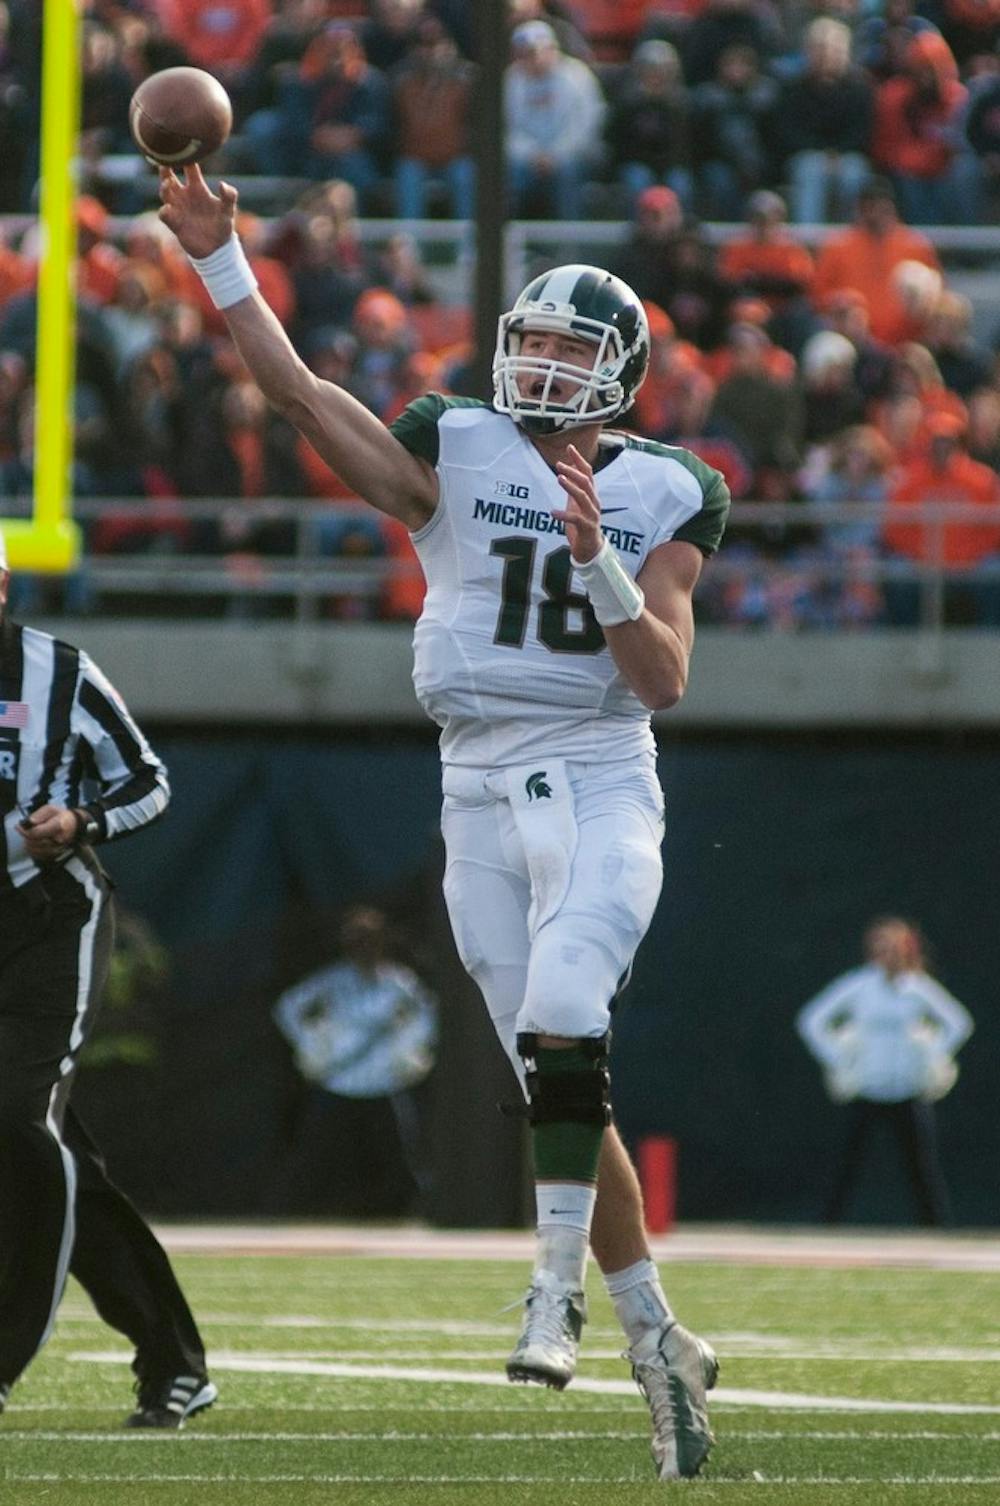 	<p>Sophomore quarterback Connor Cook throws the ball during the game against Illinois on Oct. 26, 2013, at Memorial Stadium in Champaign, Ill. The Spartans defeated the Fighting Illini, 42-3. Danyelle Morrow/The State News</p>